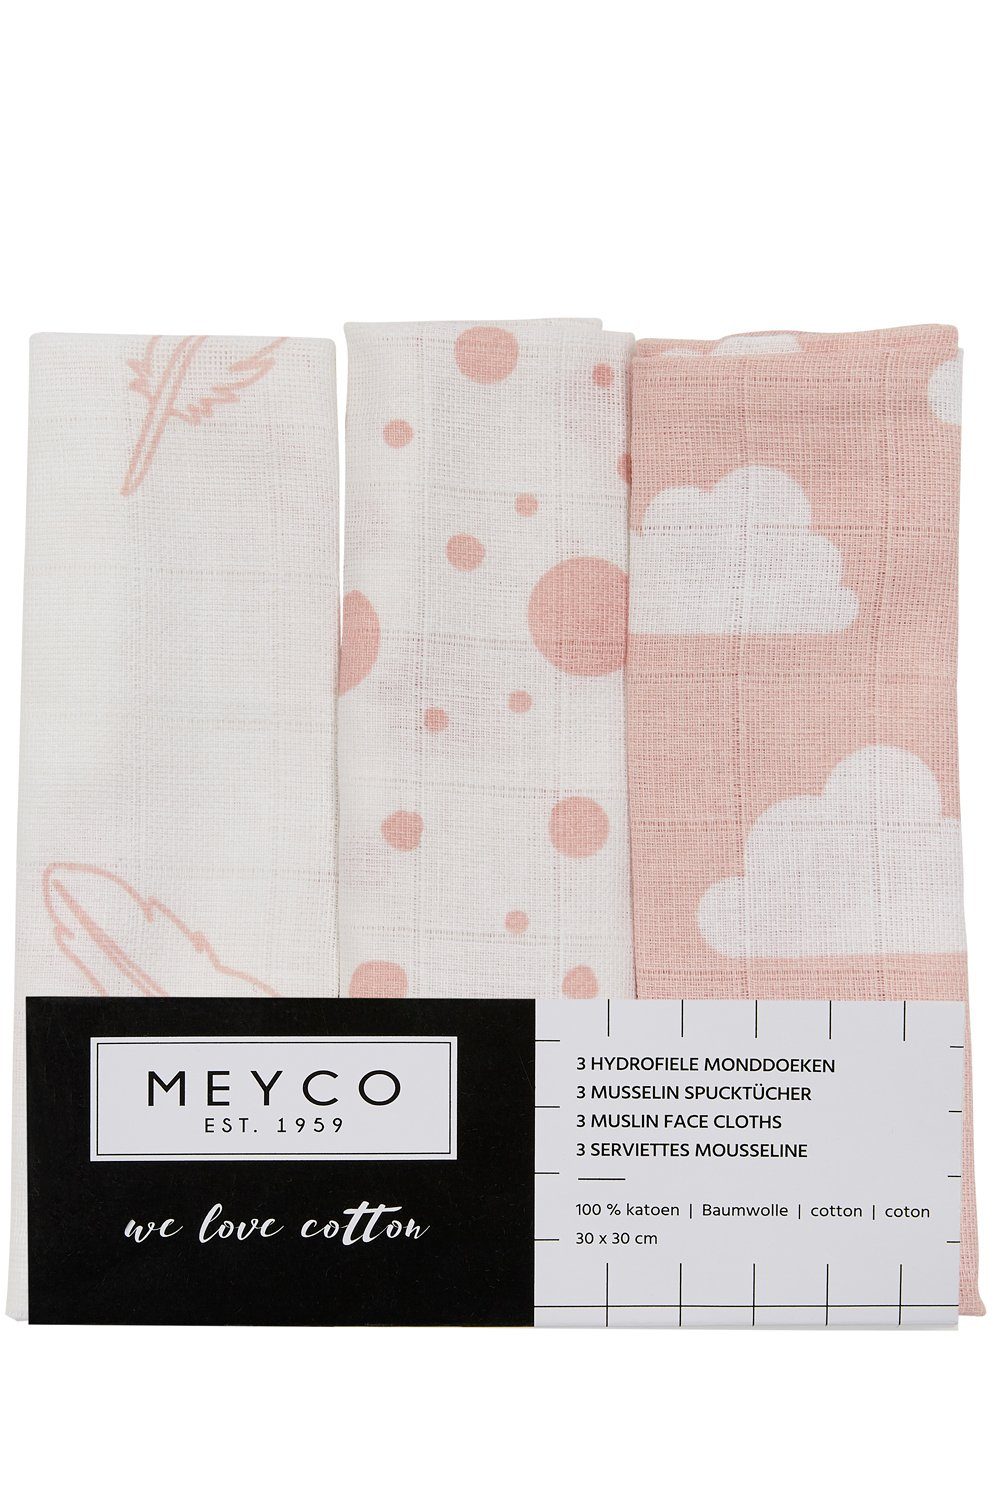 Meyco Baby Stoffwindeln 30x30cm Clouds, (3-St), Dots, Feathers Pink